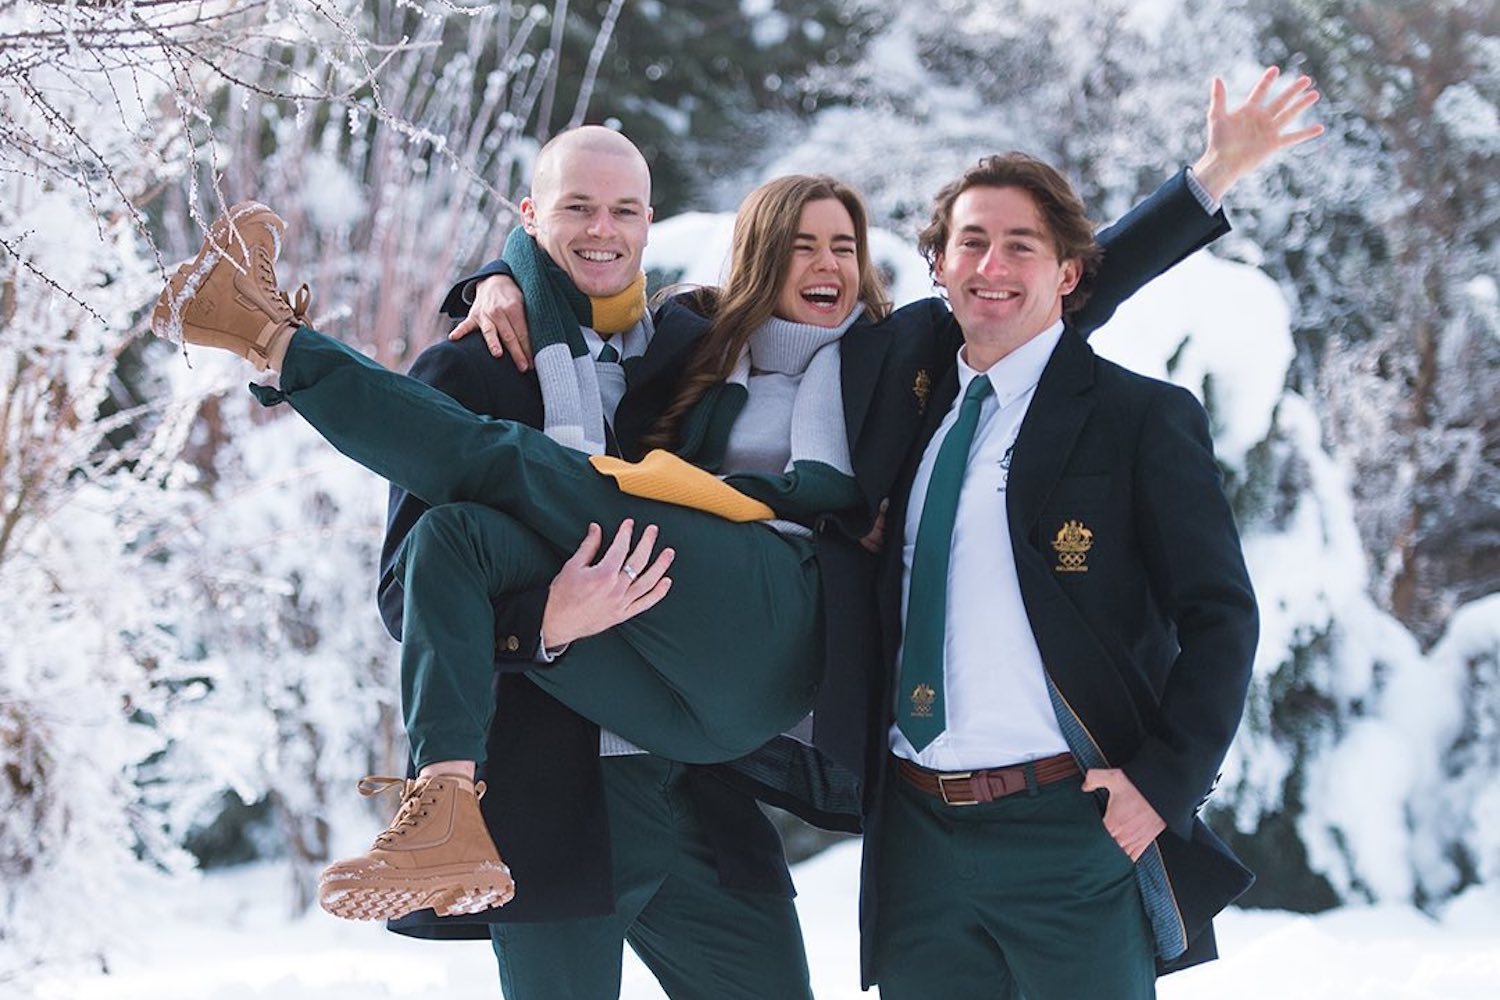 Australia’s Winter Olympic Uniforms May Be Our Most Stylish Yet